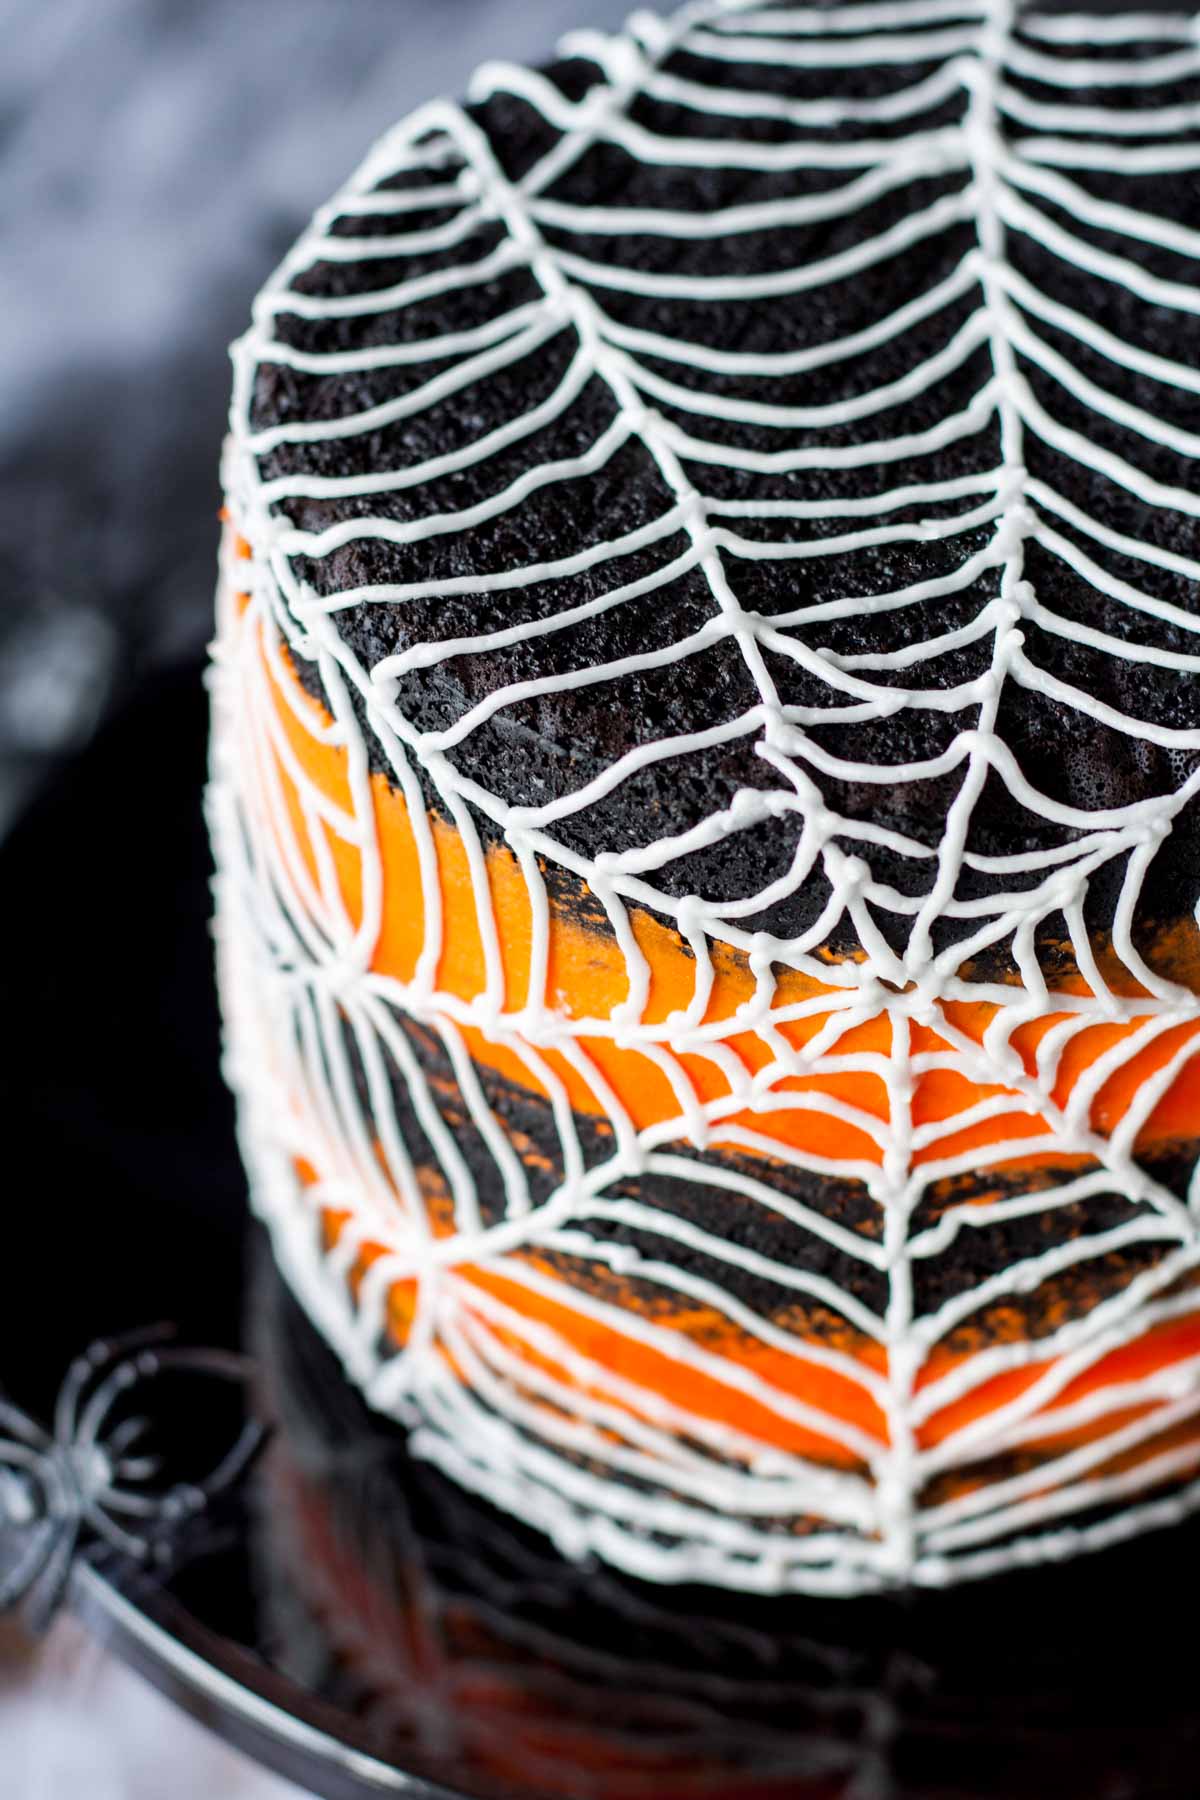 Angled shot of the piped spiderweb on the top of the cake.